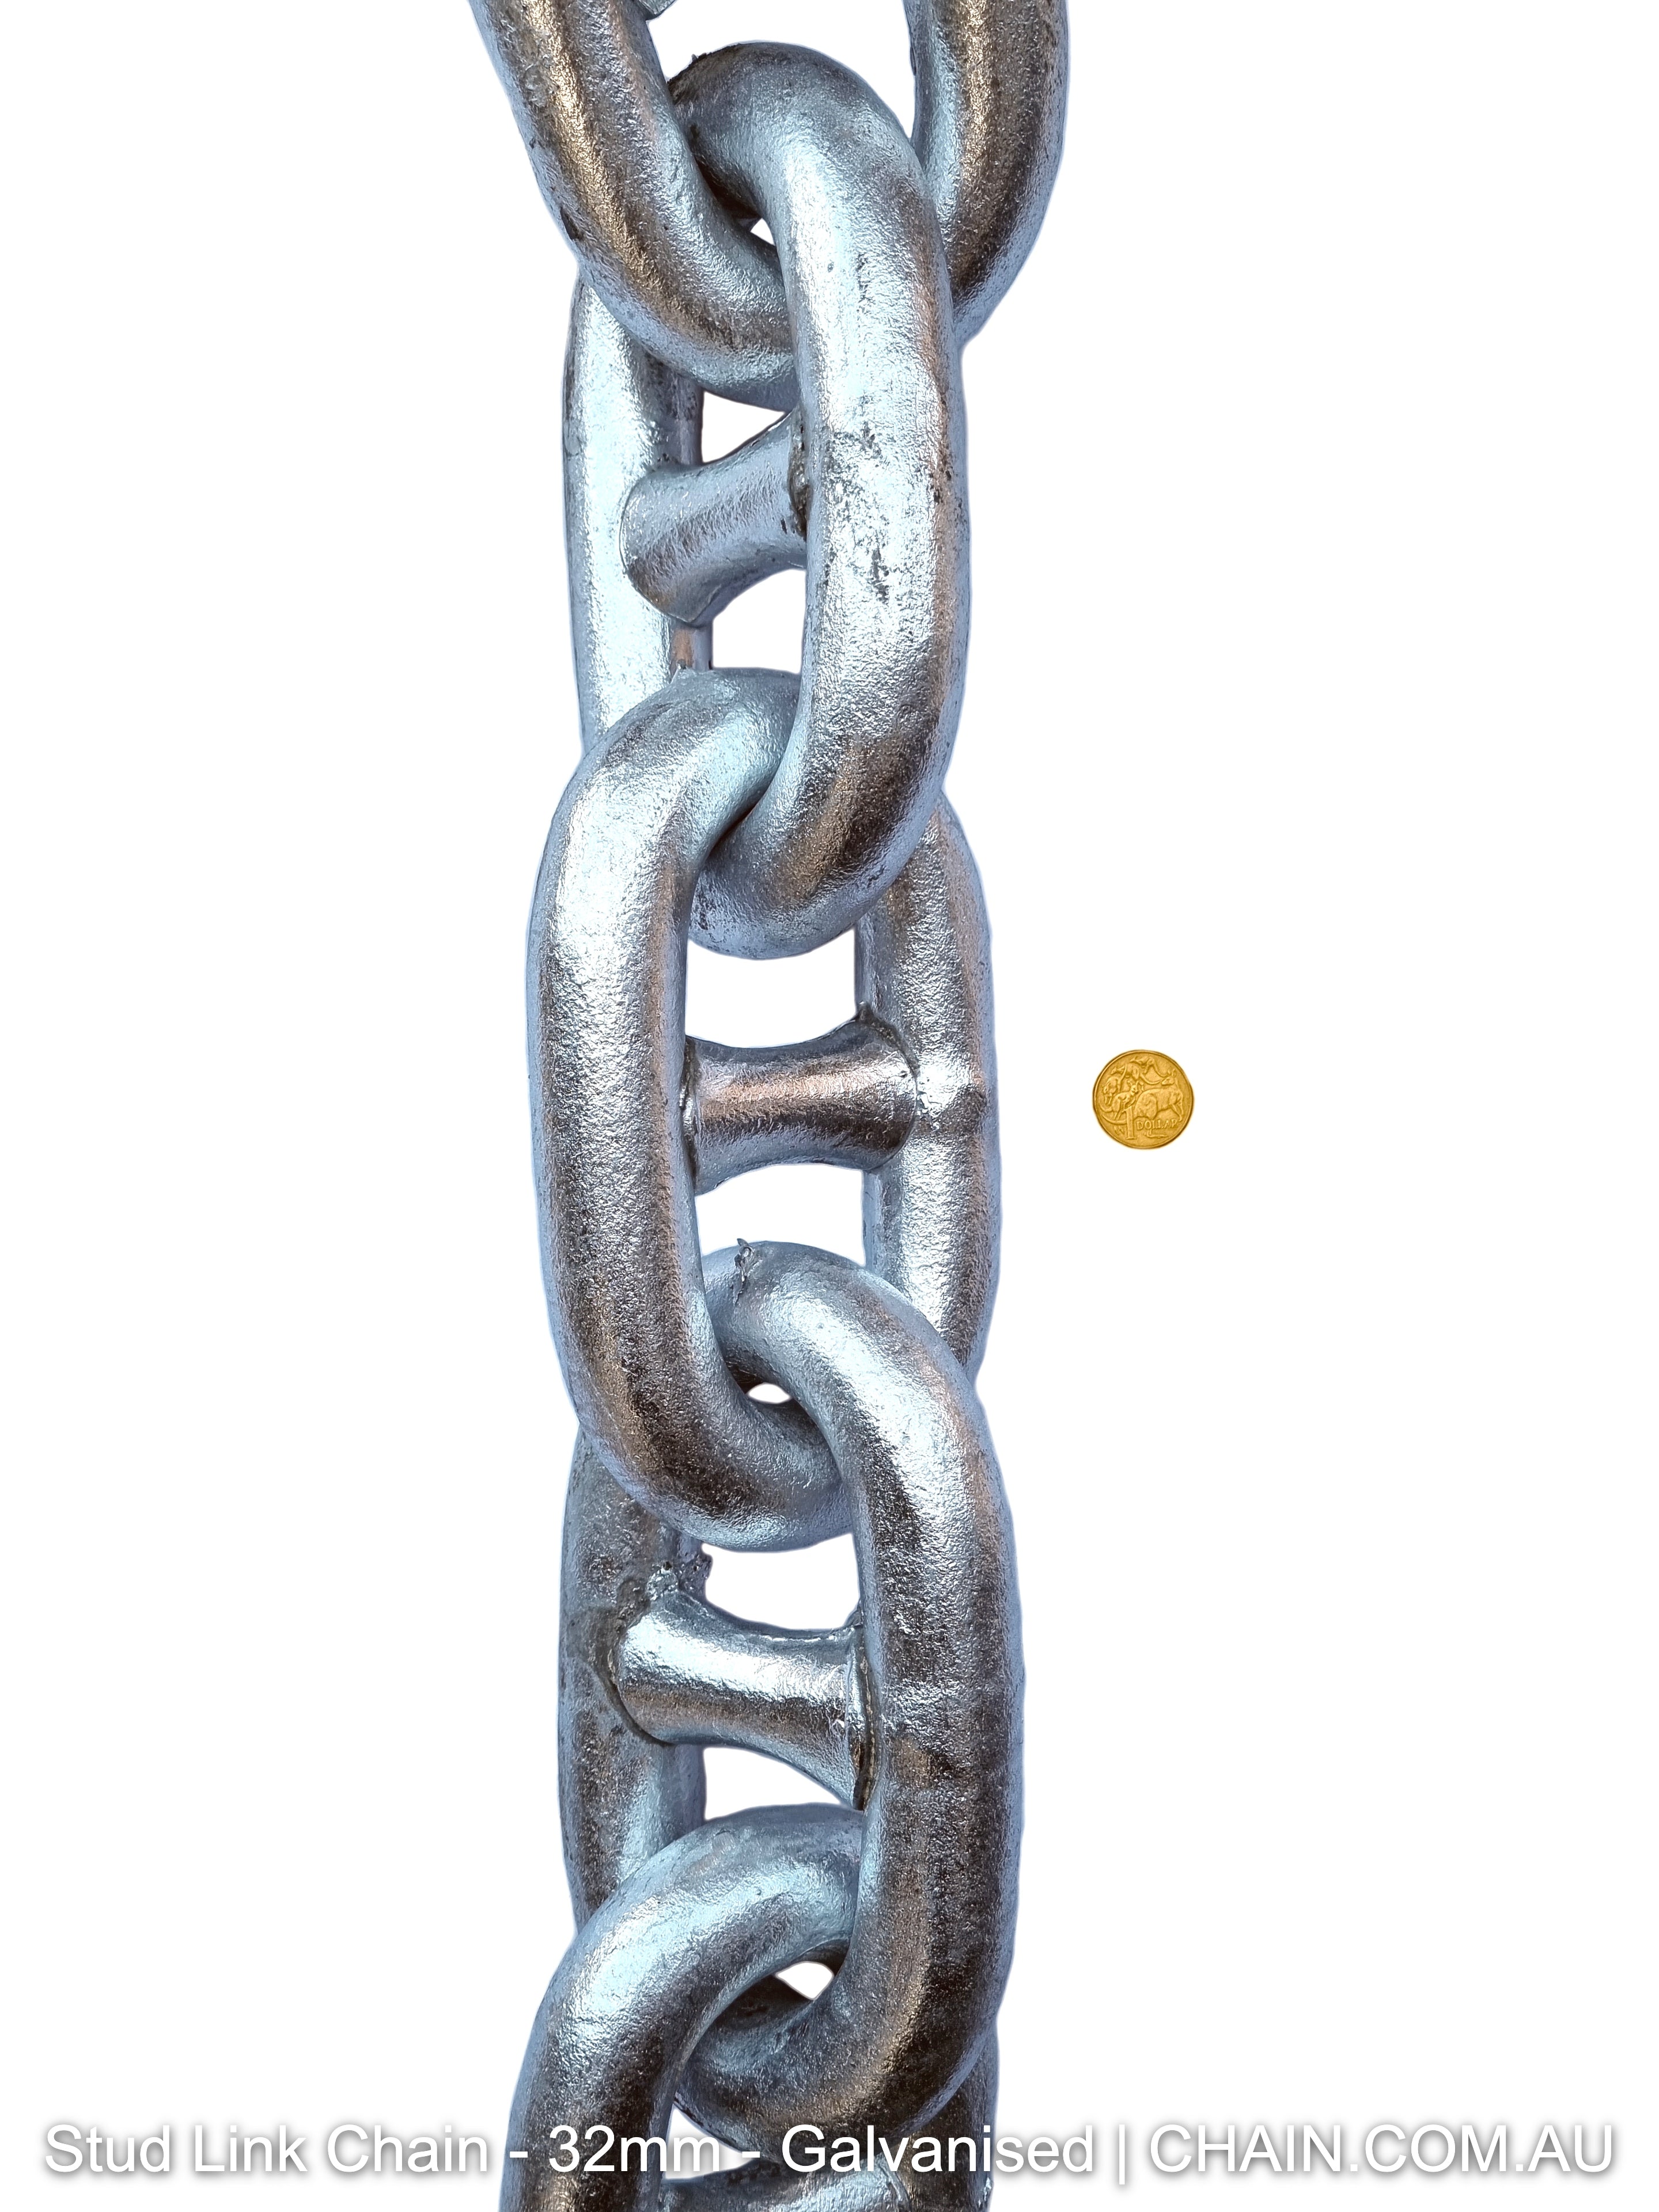 Stud Link Chain - 32mm - Galvanised - EMAIL or CALL TO ORDER - 0